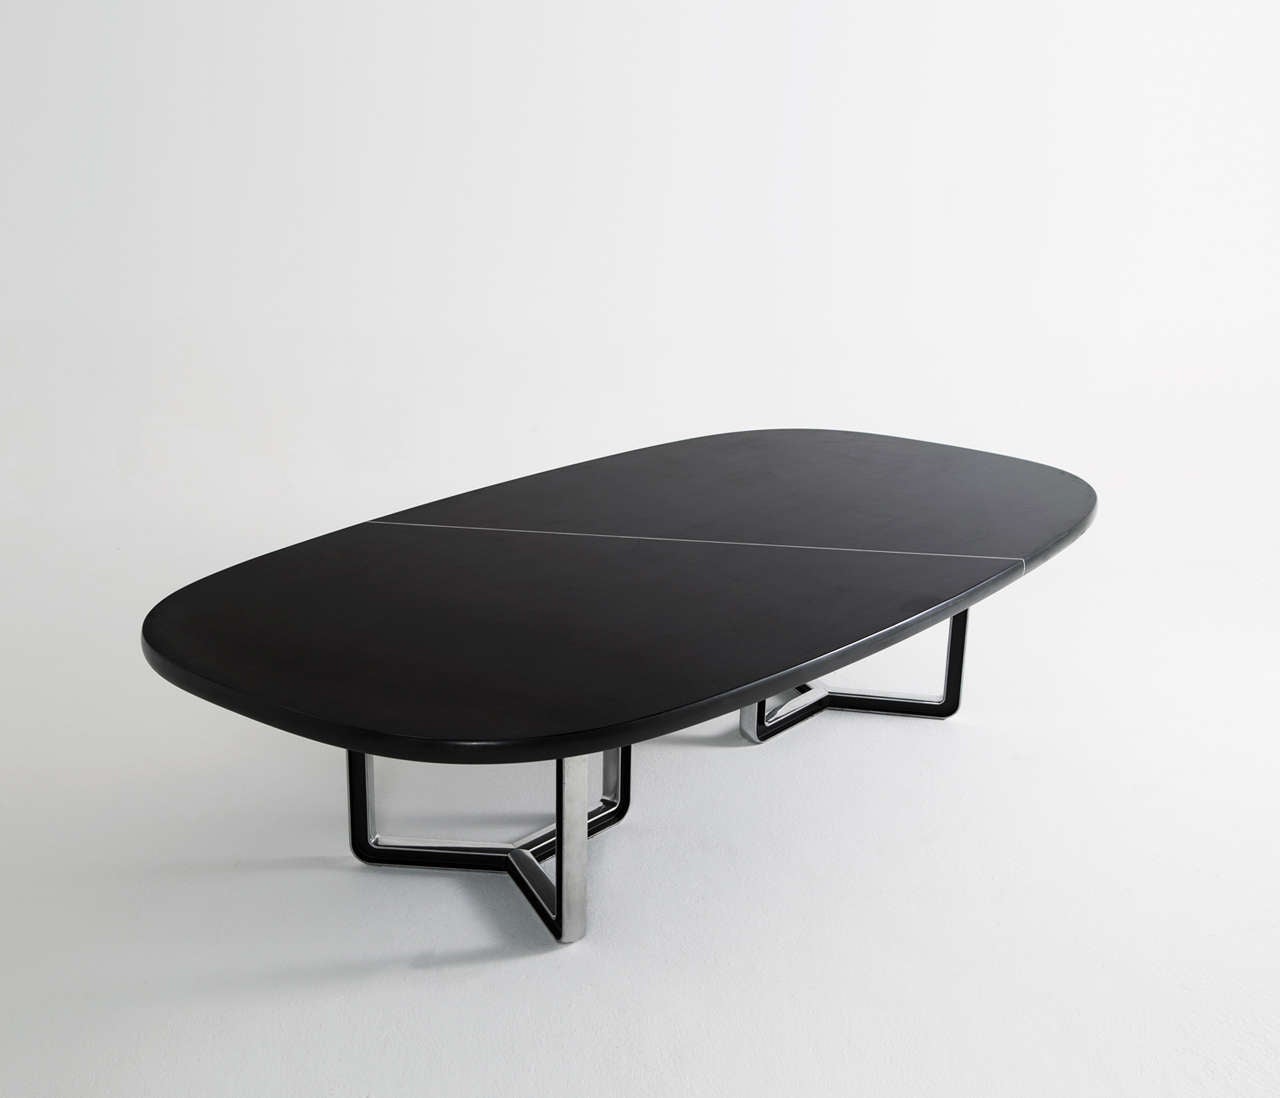 Tecno Design Centre for Tecno, lacquered black wood and aluminum base, conference table 335a, Italy, 1975-1978.

Large oversized conference table with a black top. The table is composed of two black pieces connected via steel inserts and mounted on